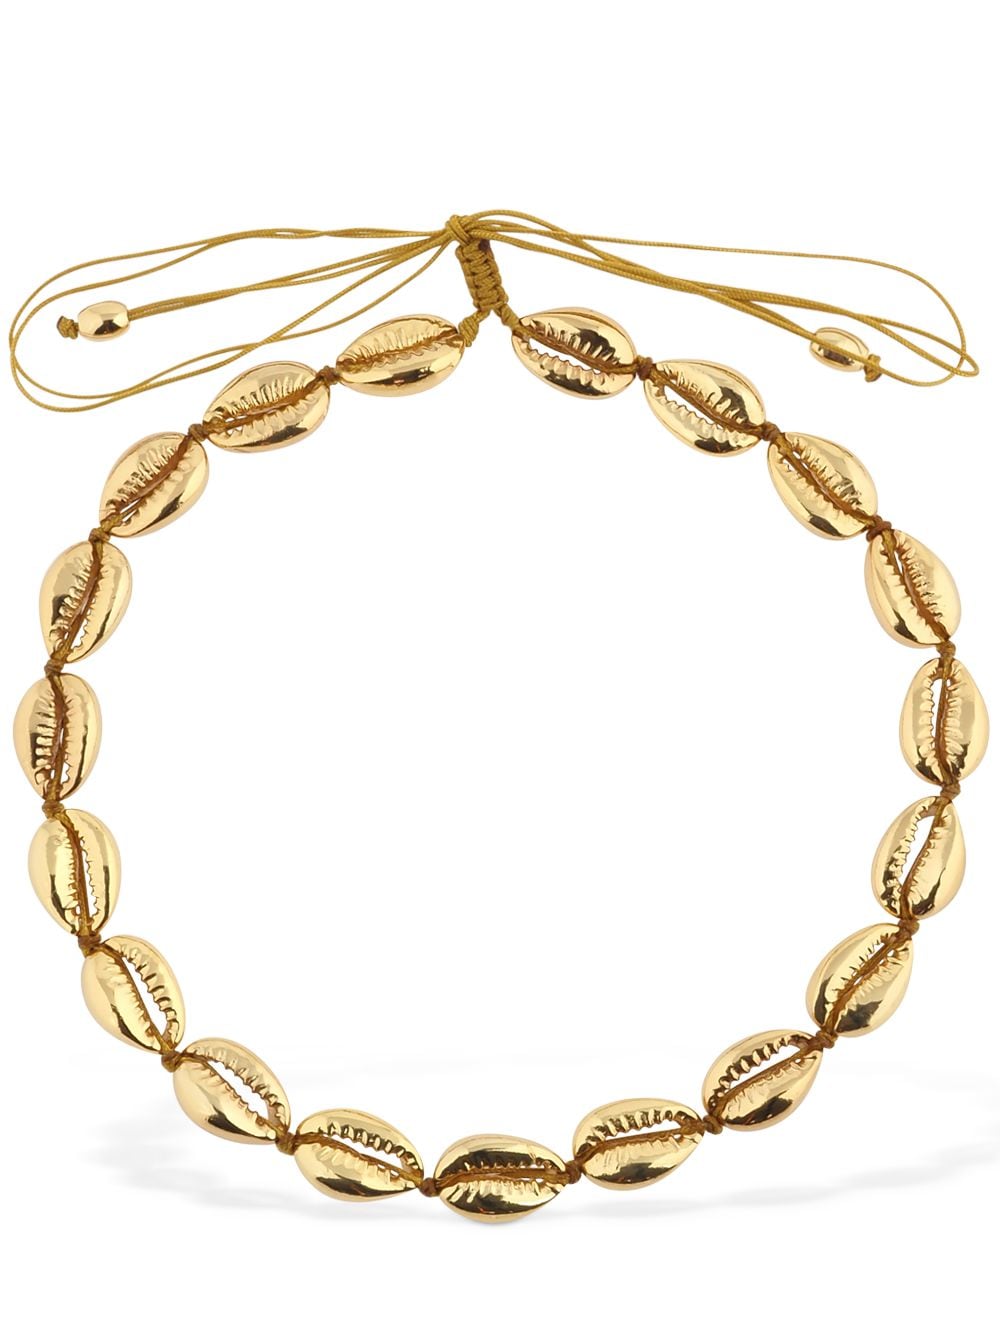 Tohum Design Medium Faux Puka Shell Necklace In Gold